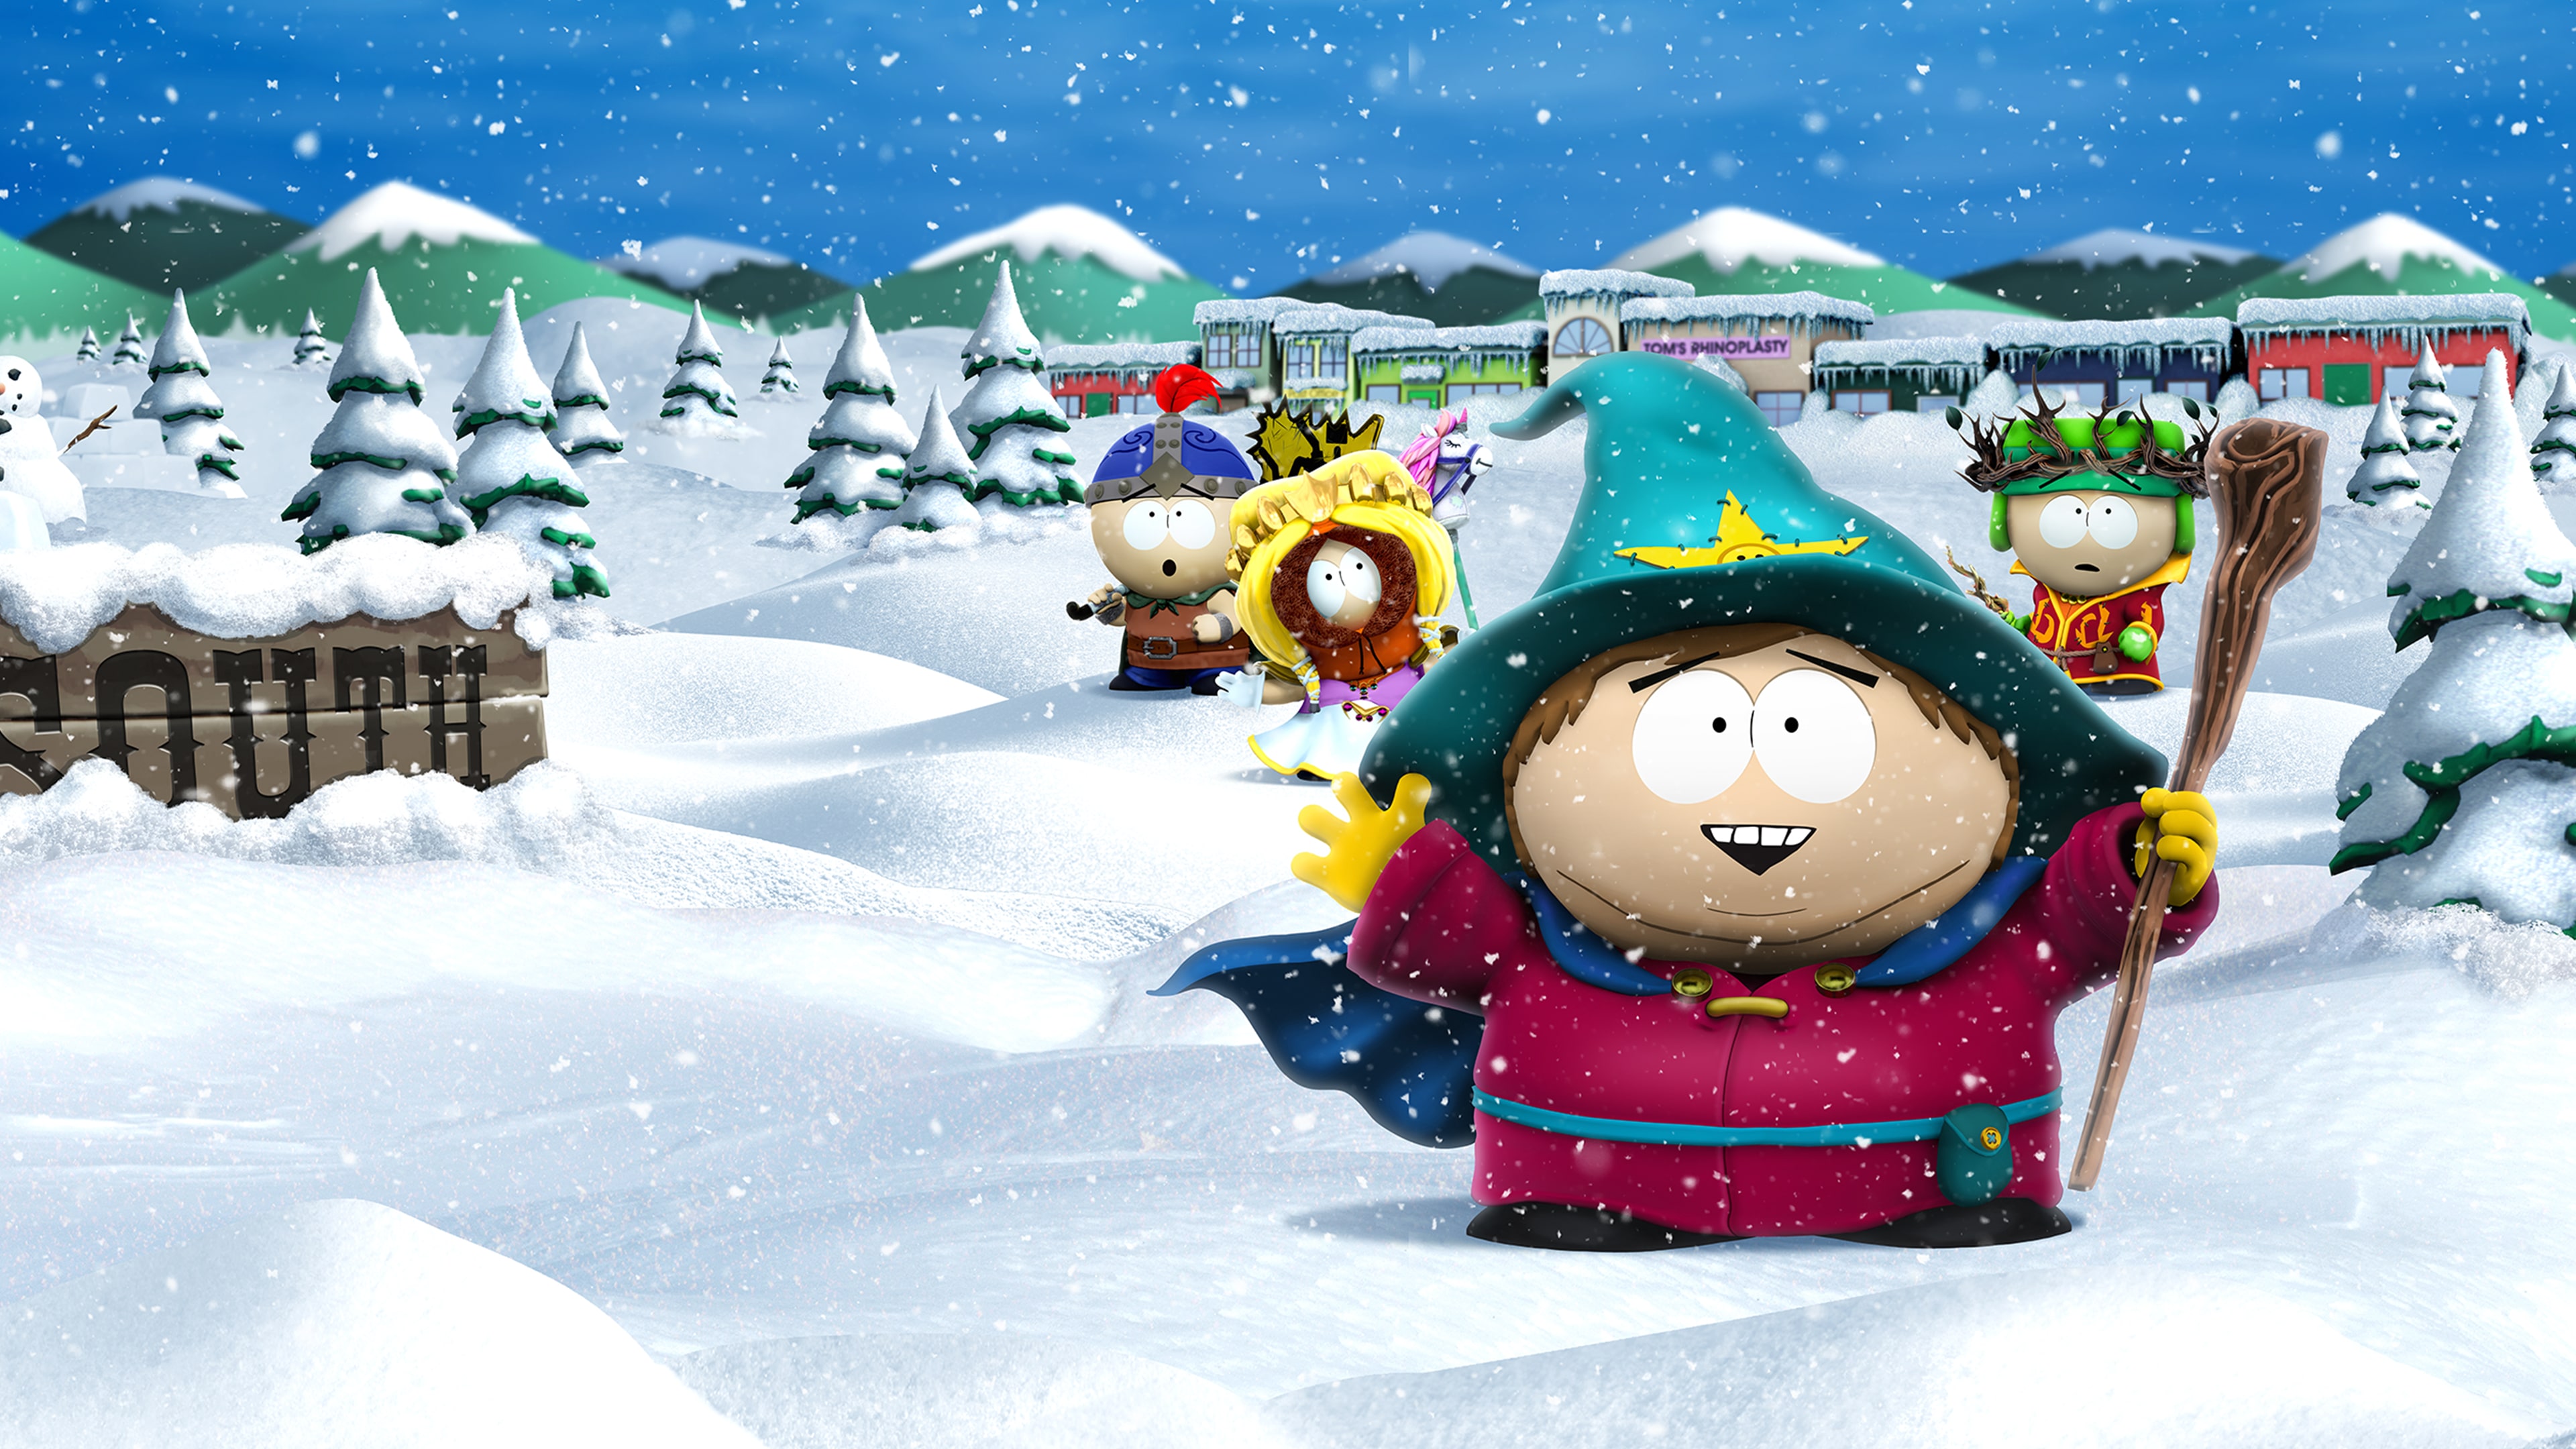 SOUTH PARK: SNOW DAY! Digital Deluxe